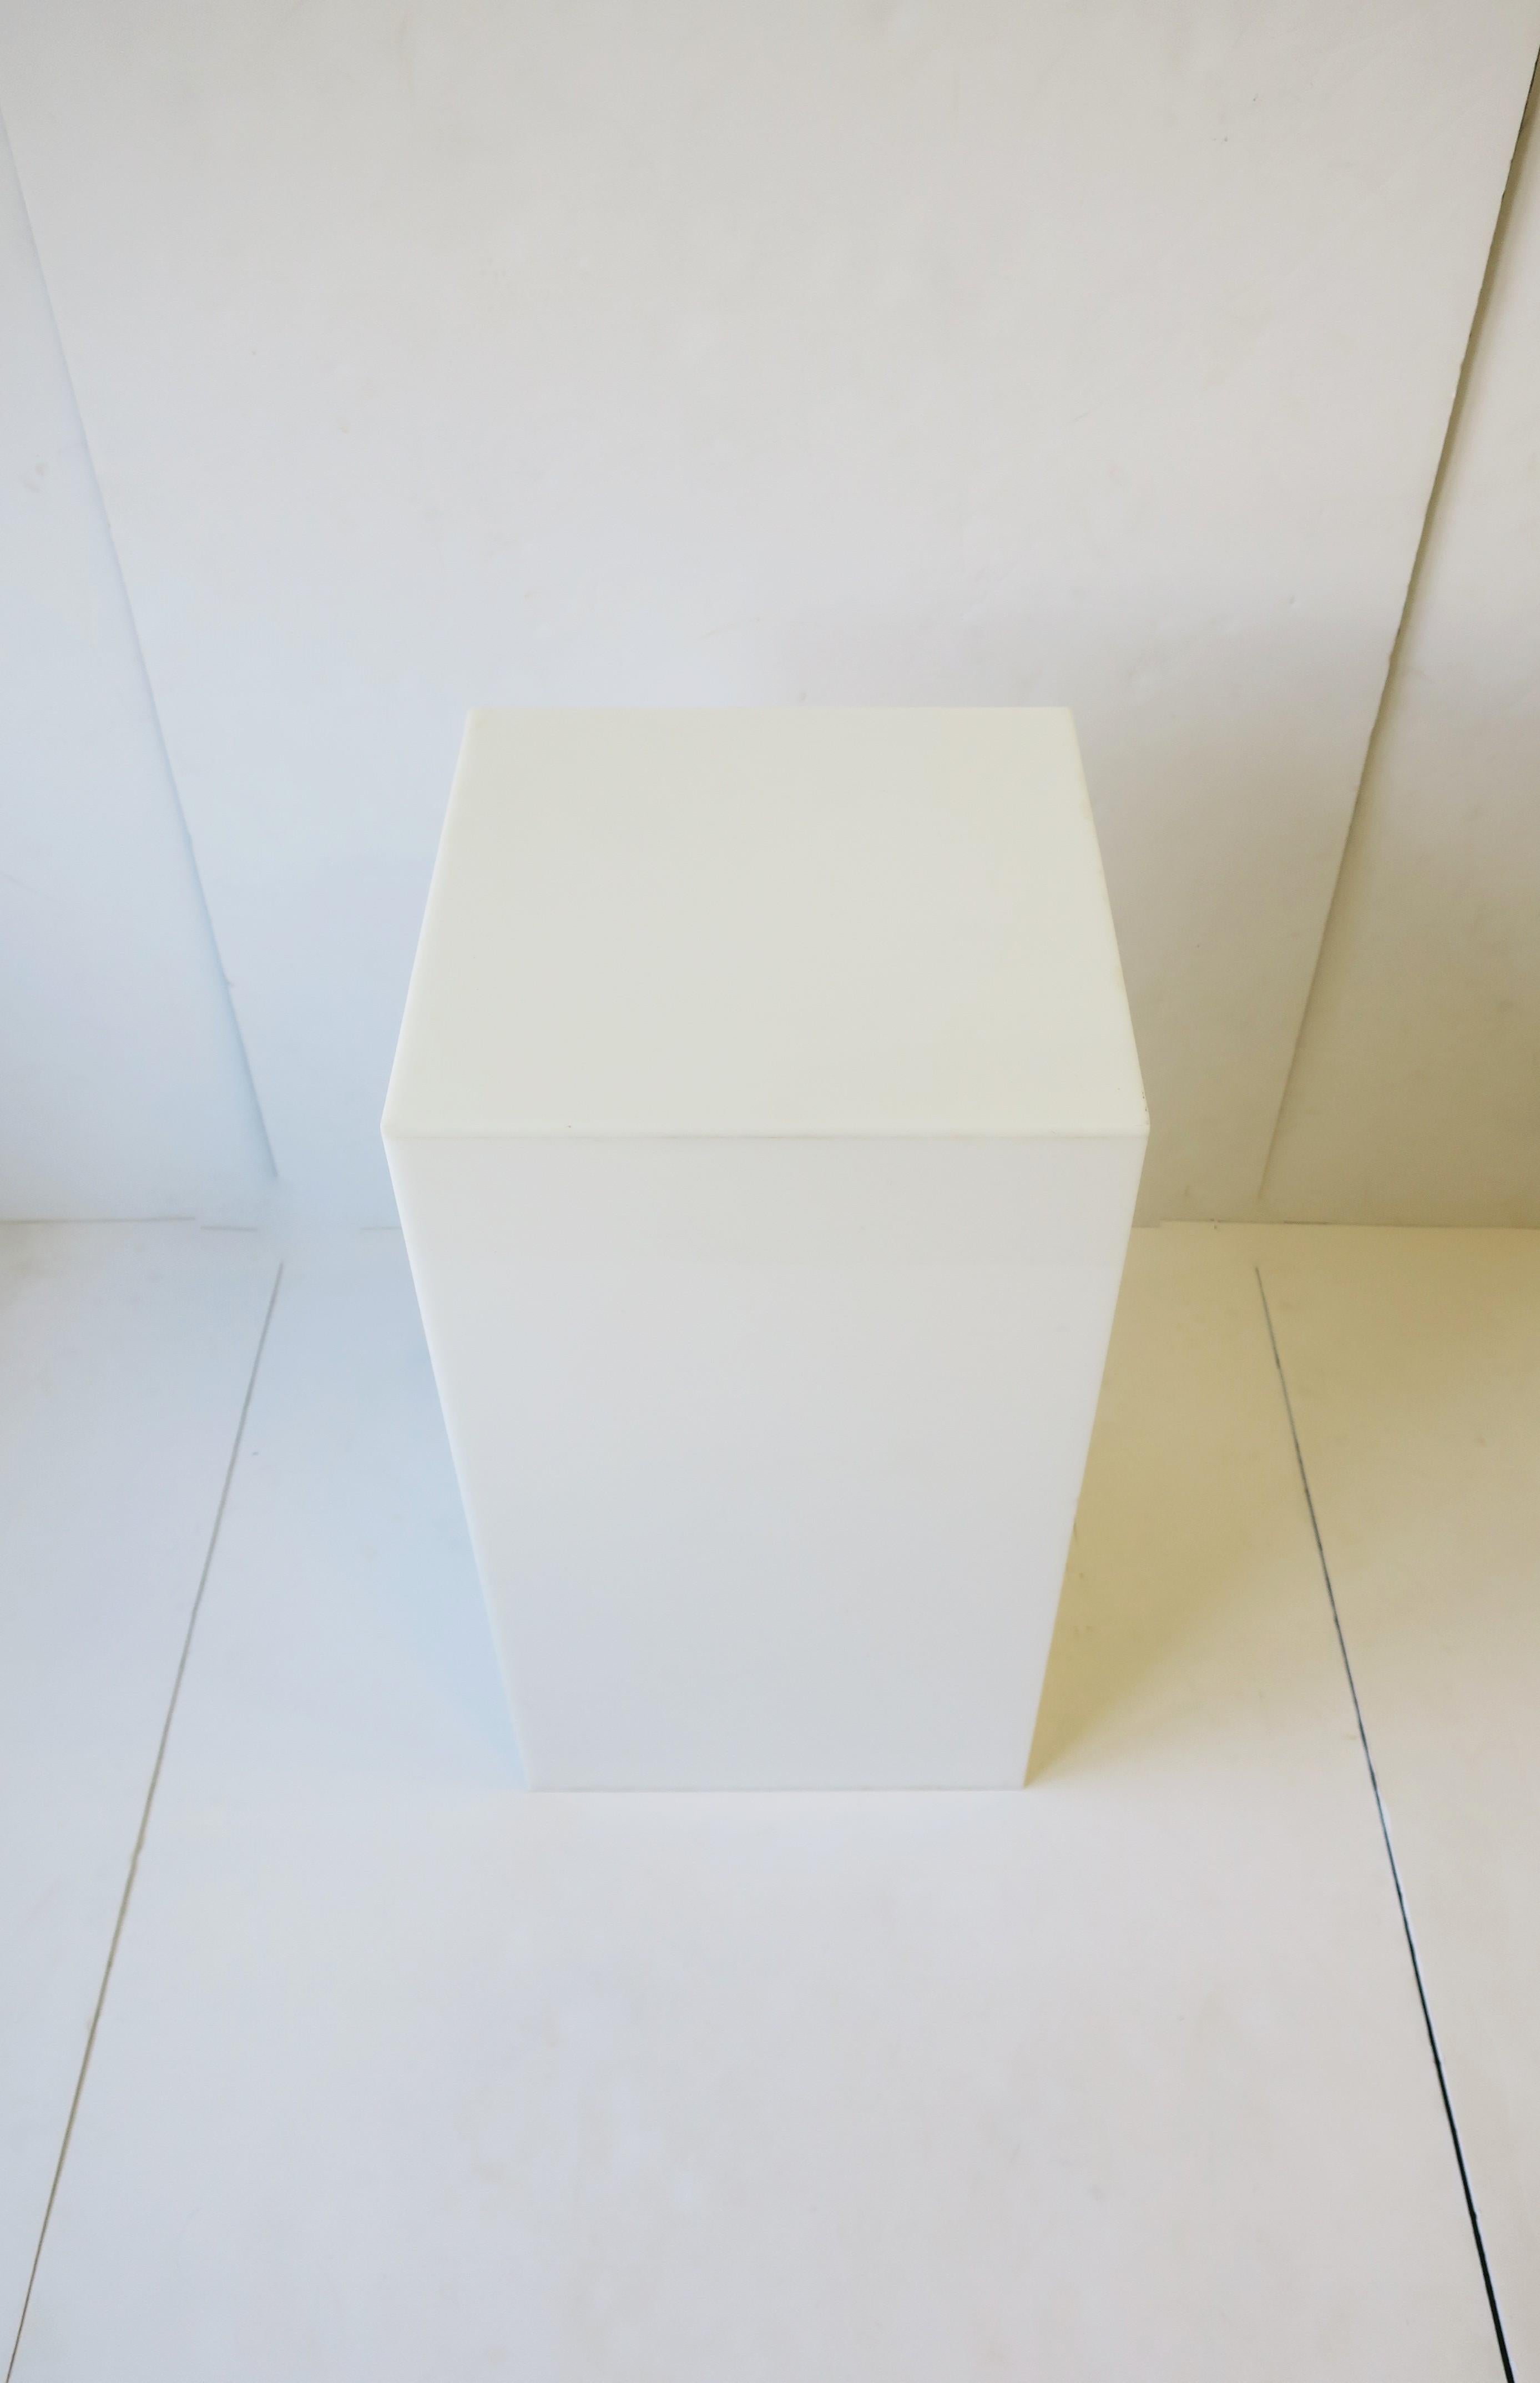 A modern or postmodern period white acrylic pedestal column stand display piece or end table, circa late 20th century. Great for items such as art, sculpture, jewelry display, plant, and more; Or as and end table as demonstrated with books and table